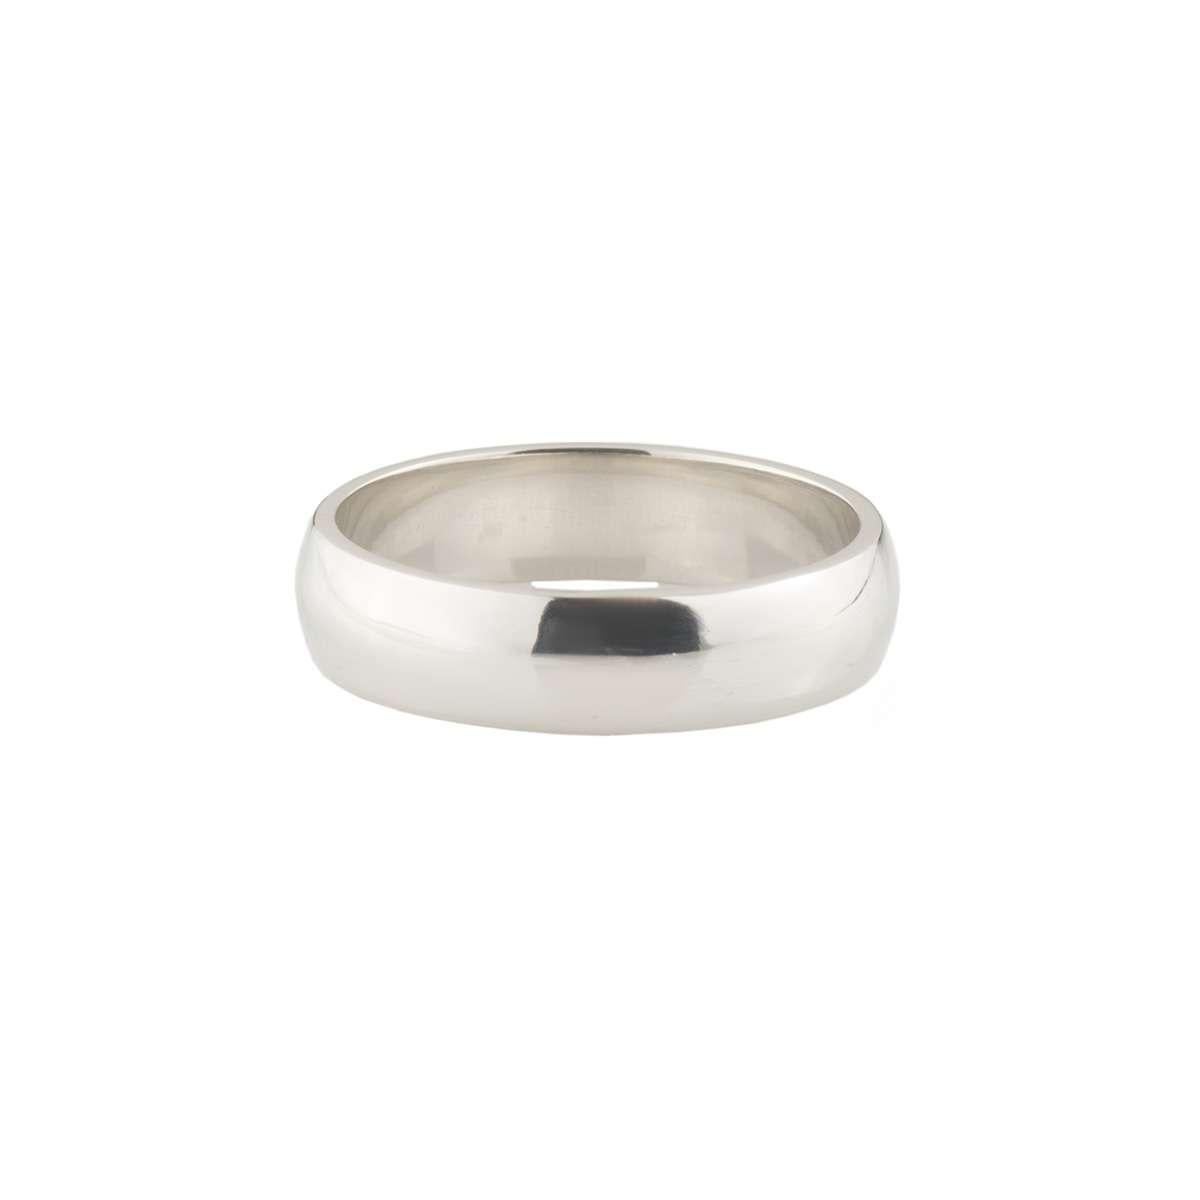 A classic wedding band in platinum. The band is 5mm in width and is a D-shape fit with a polished finish. The ring is currently a size UK Q - EU 57 but can be adjusted for a perfect fit and has a gross weight of 8.30 grams.

The ring comes complete